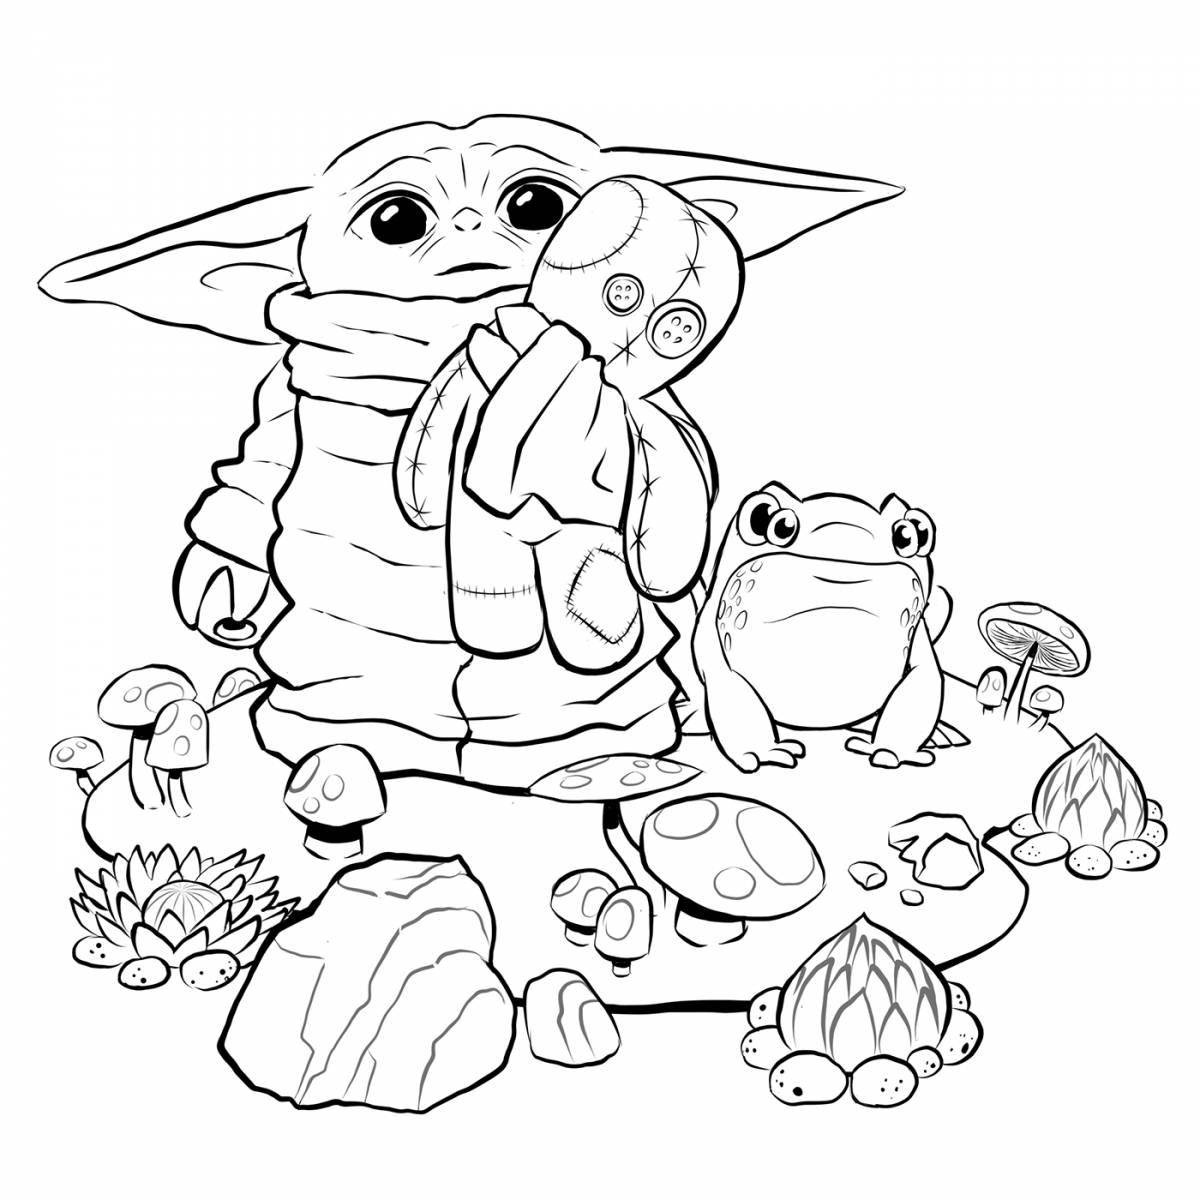 Adorable star wars food coloring page